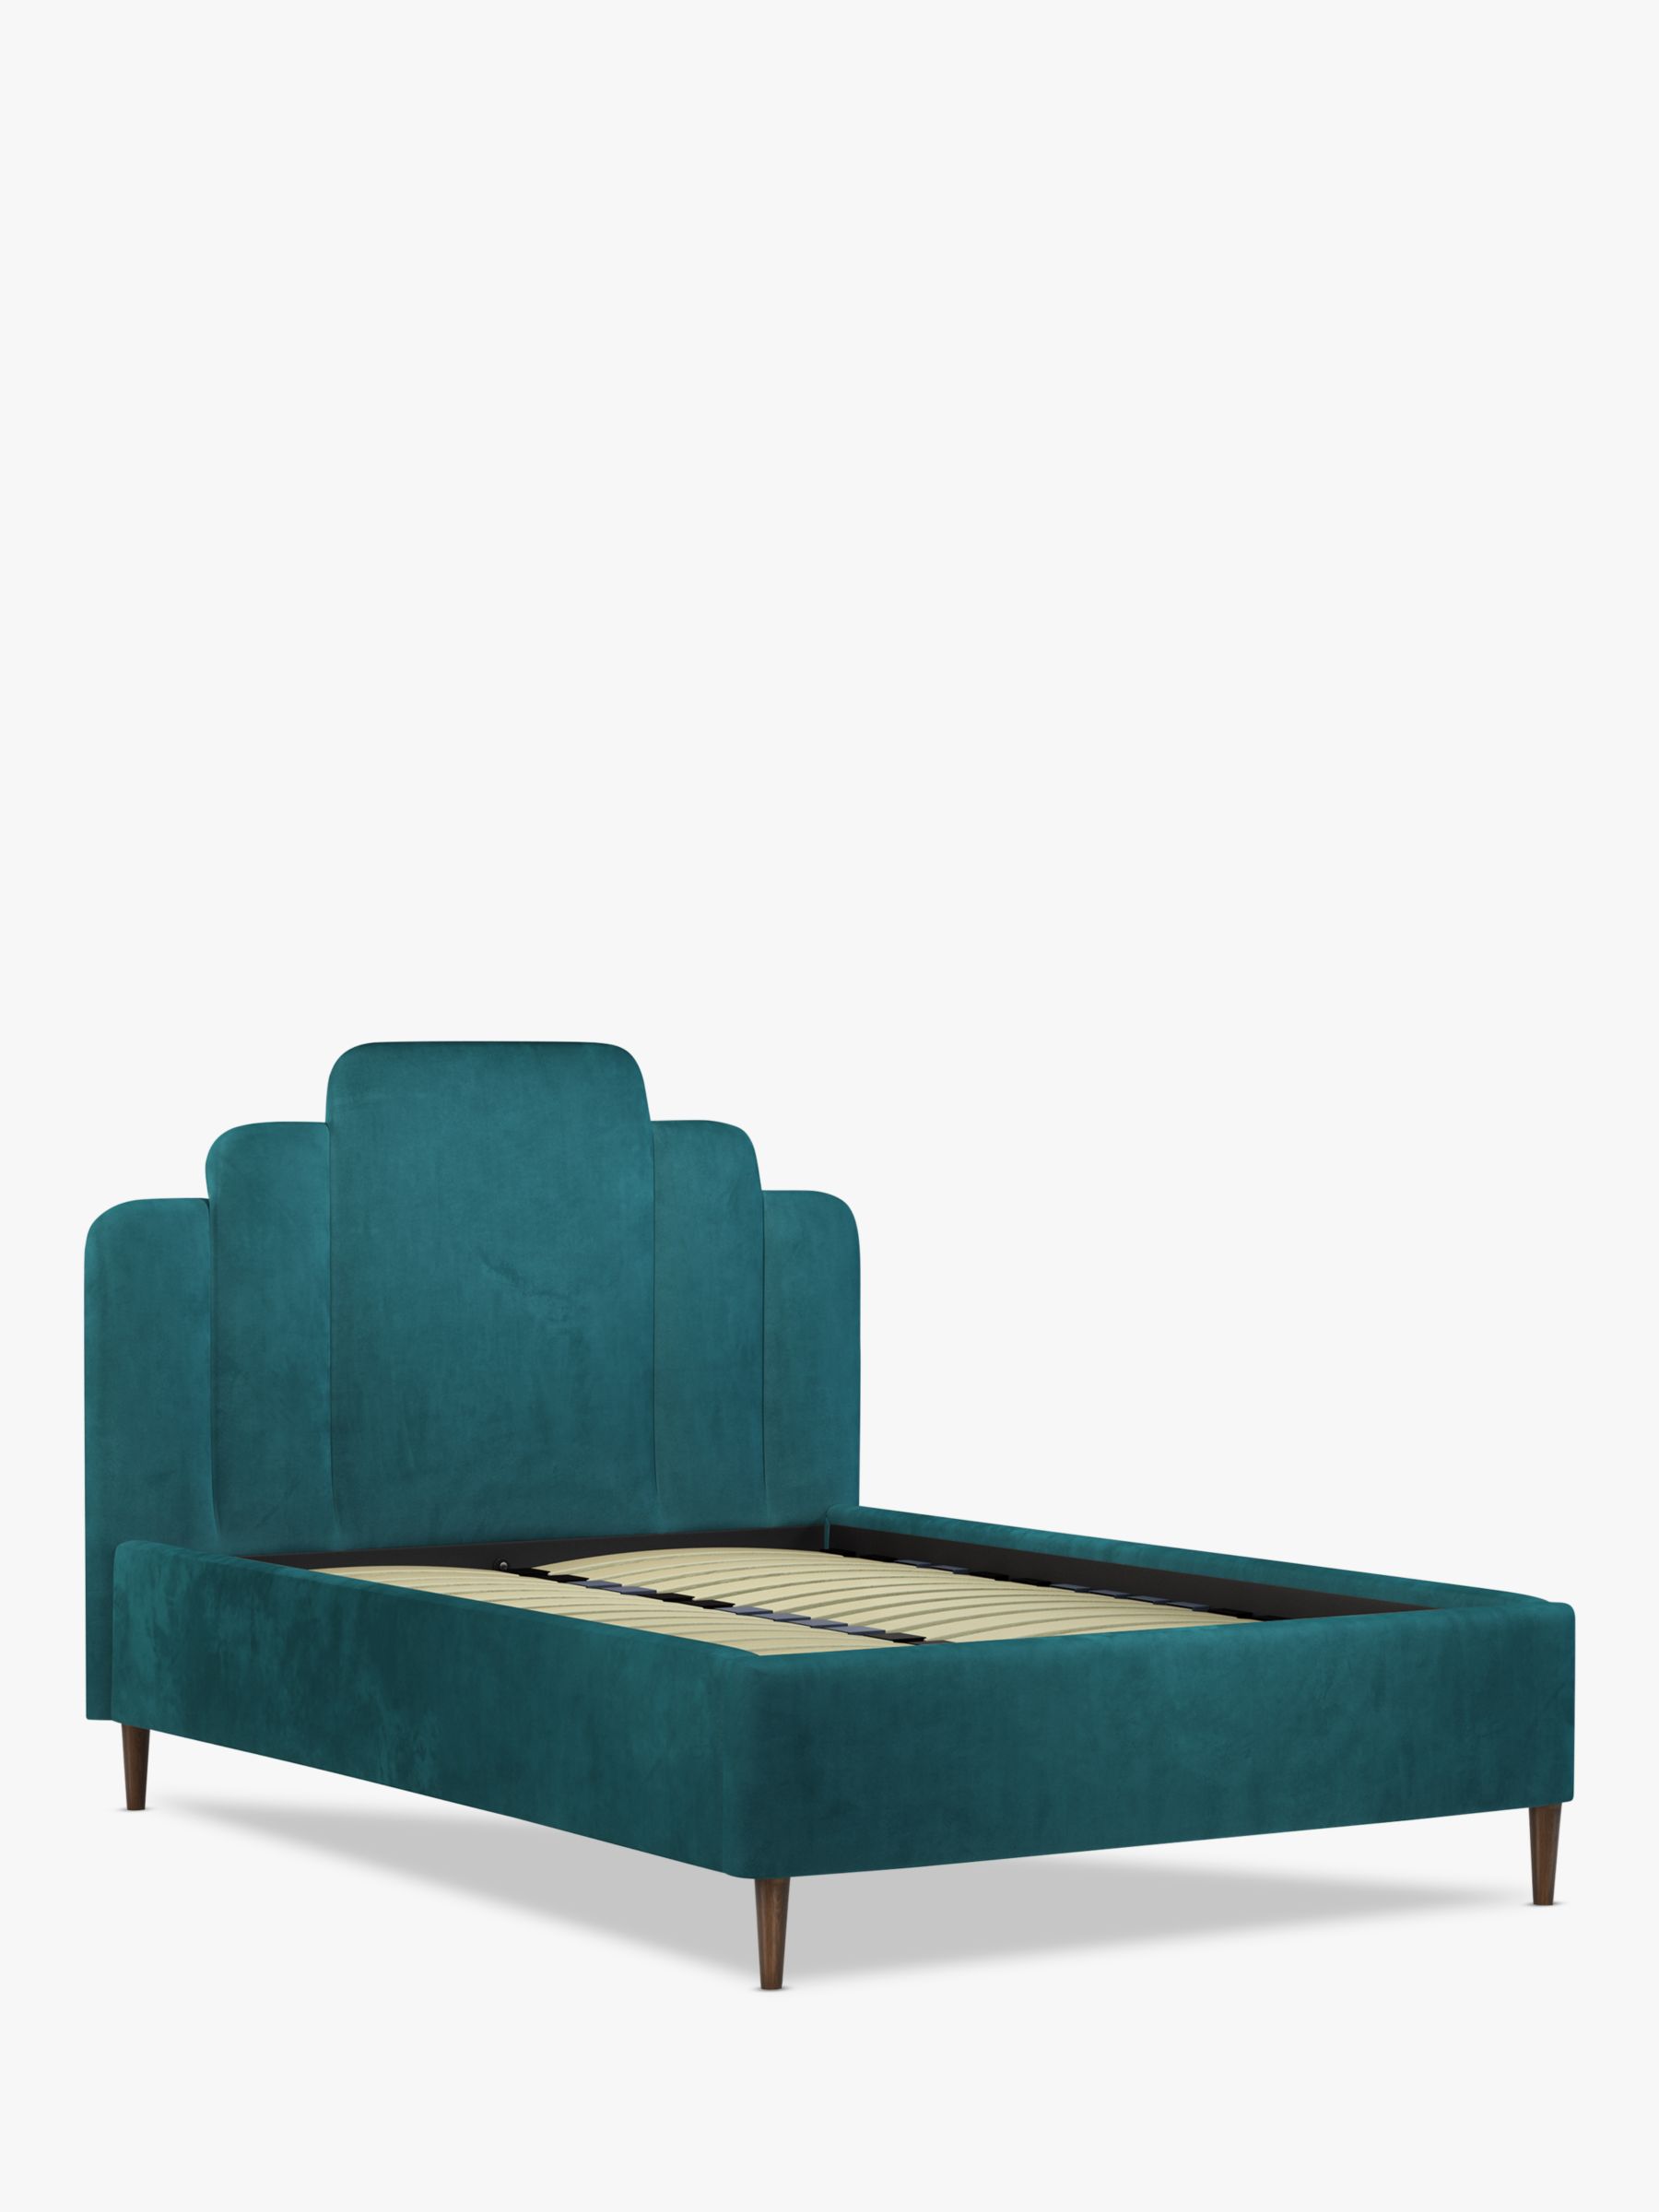 Photo of John lewis boutique upholstered bed frame double